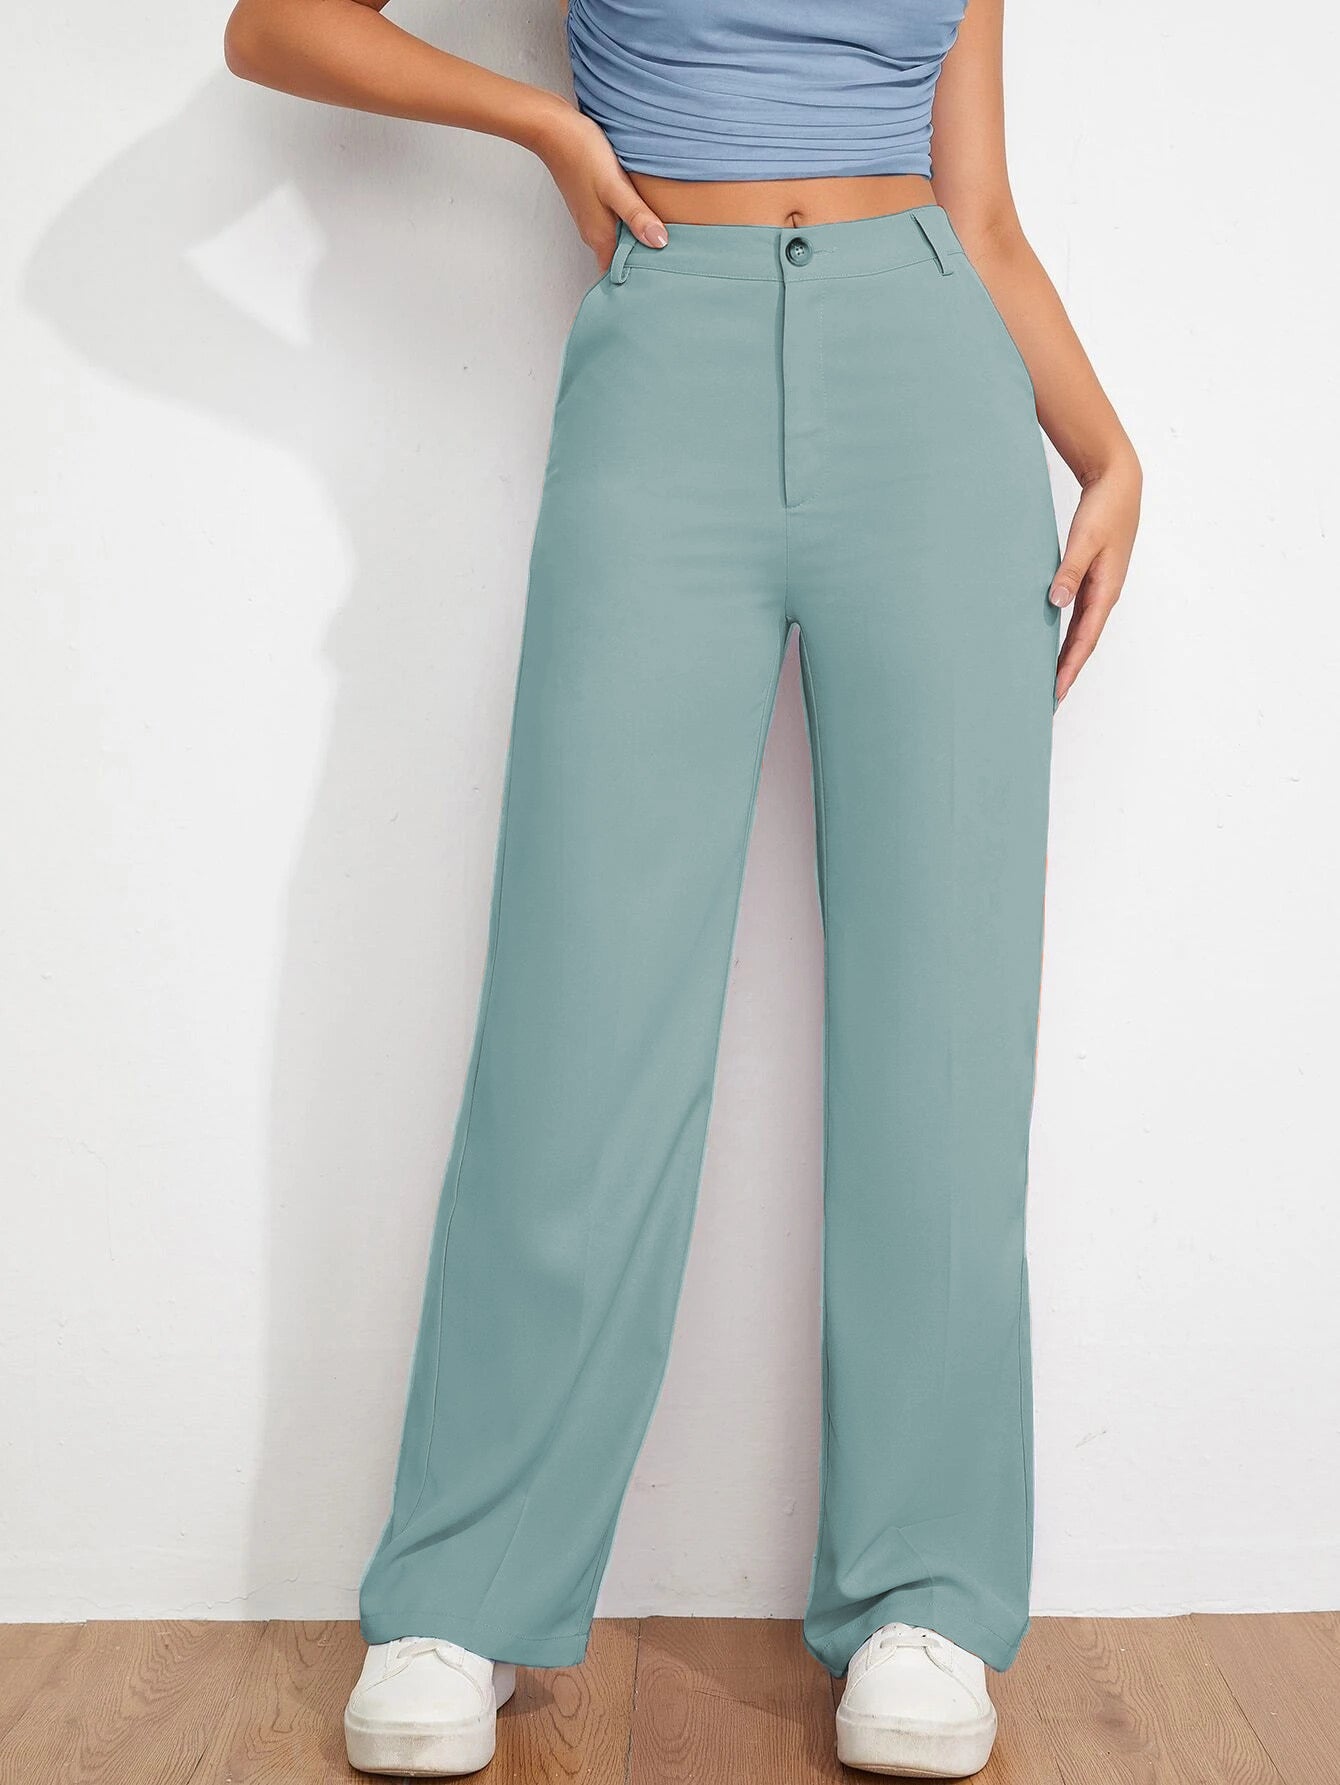 Dark Green Mid Rise Tailored Trousers